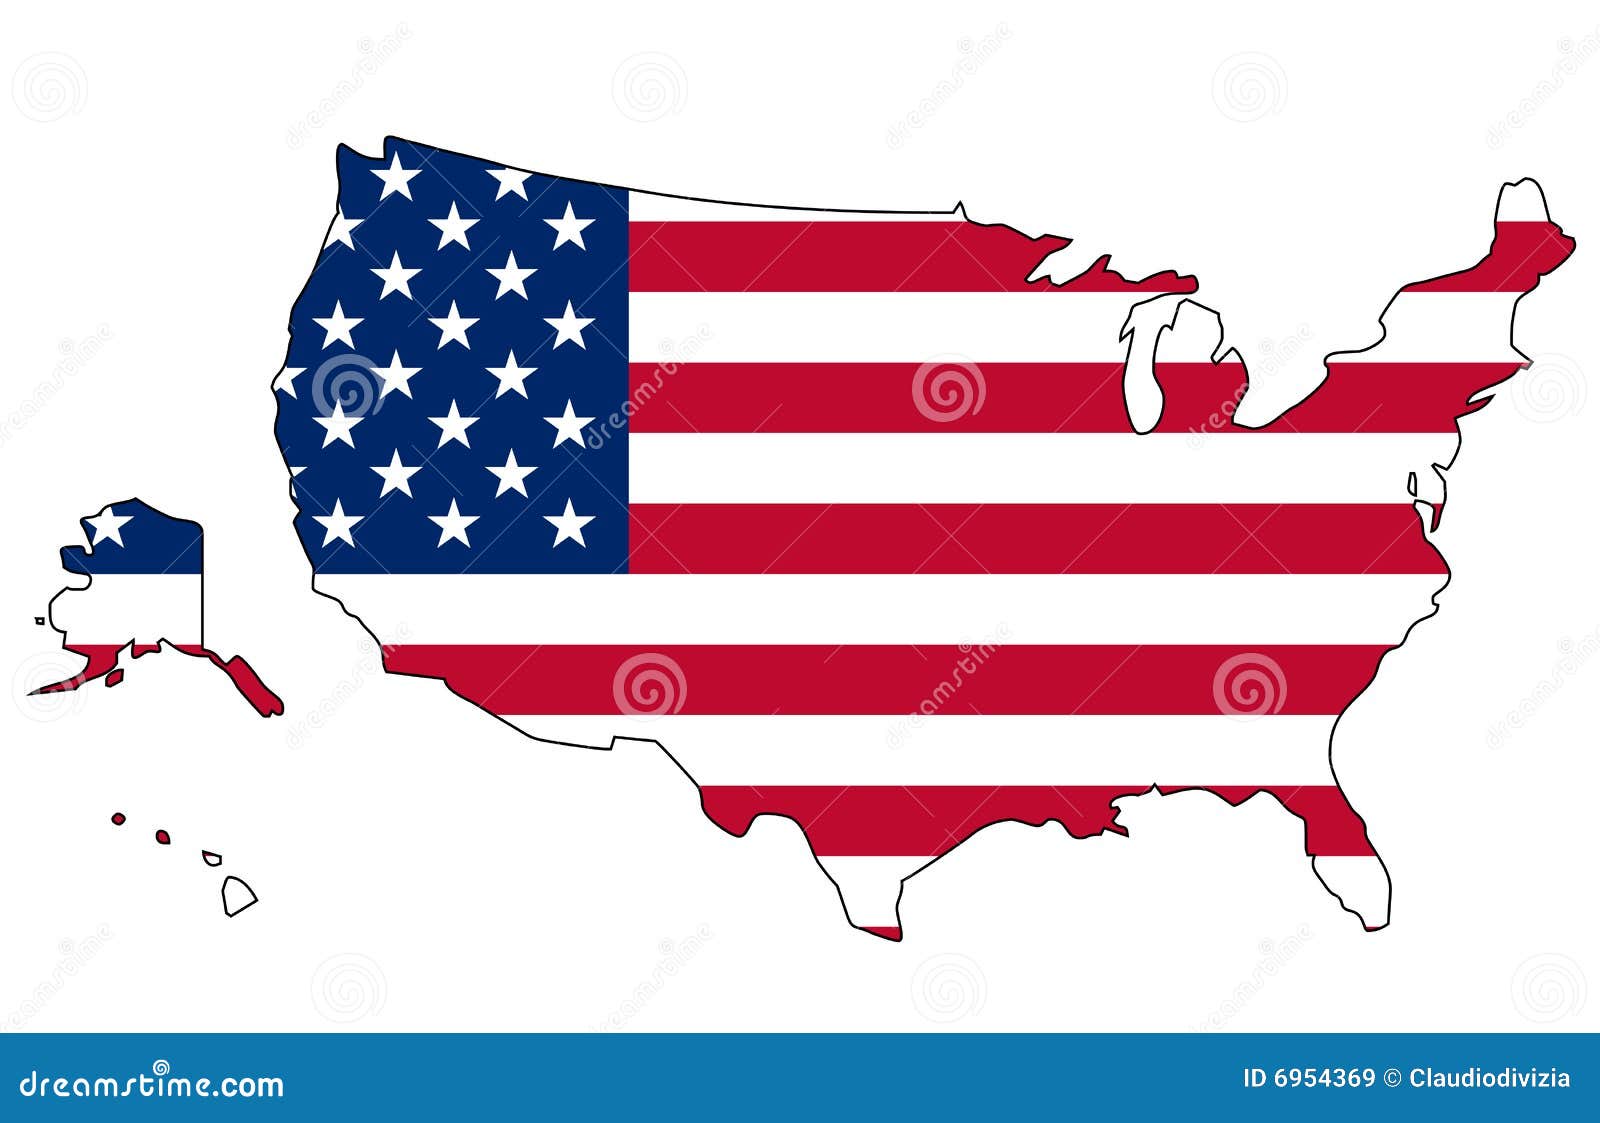 Usa Flag And Map Royalty Free Stock Images Image 6954369